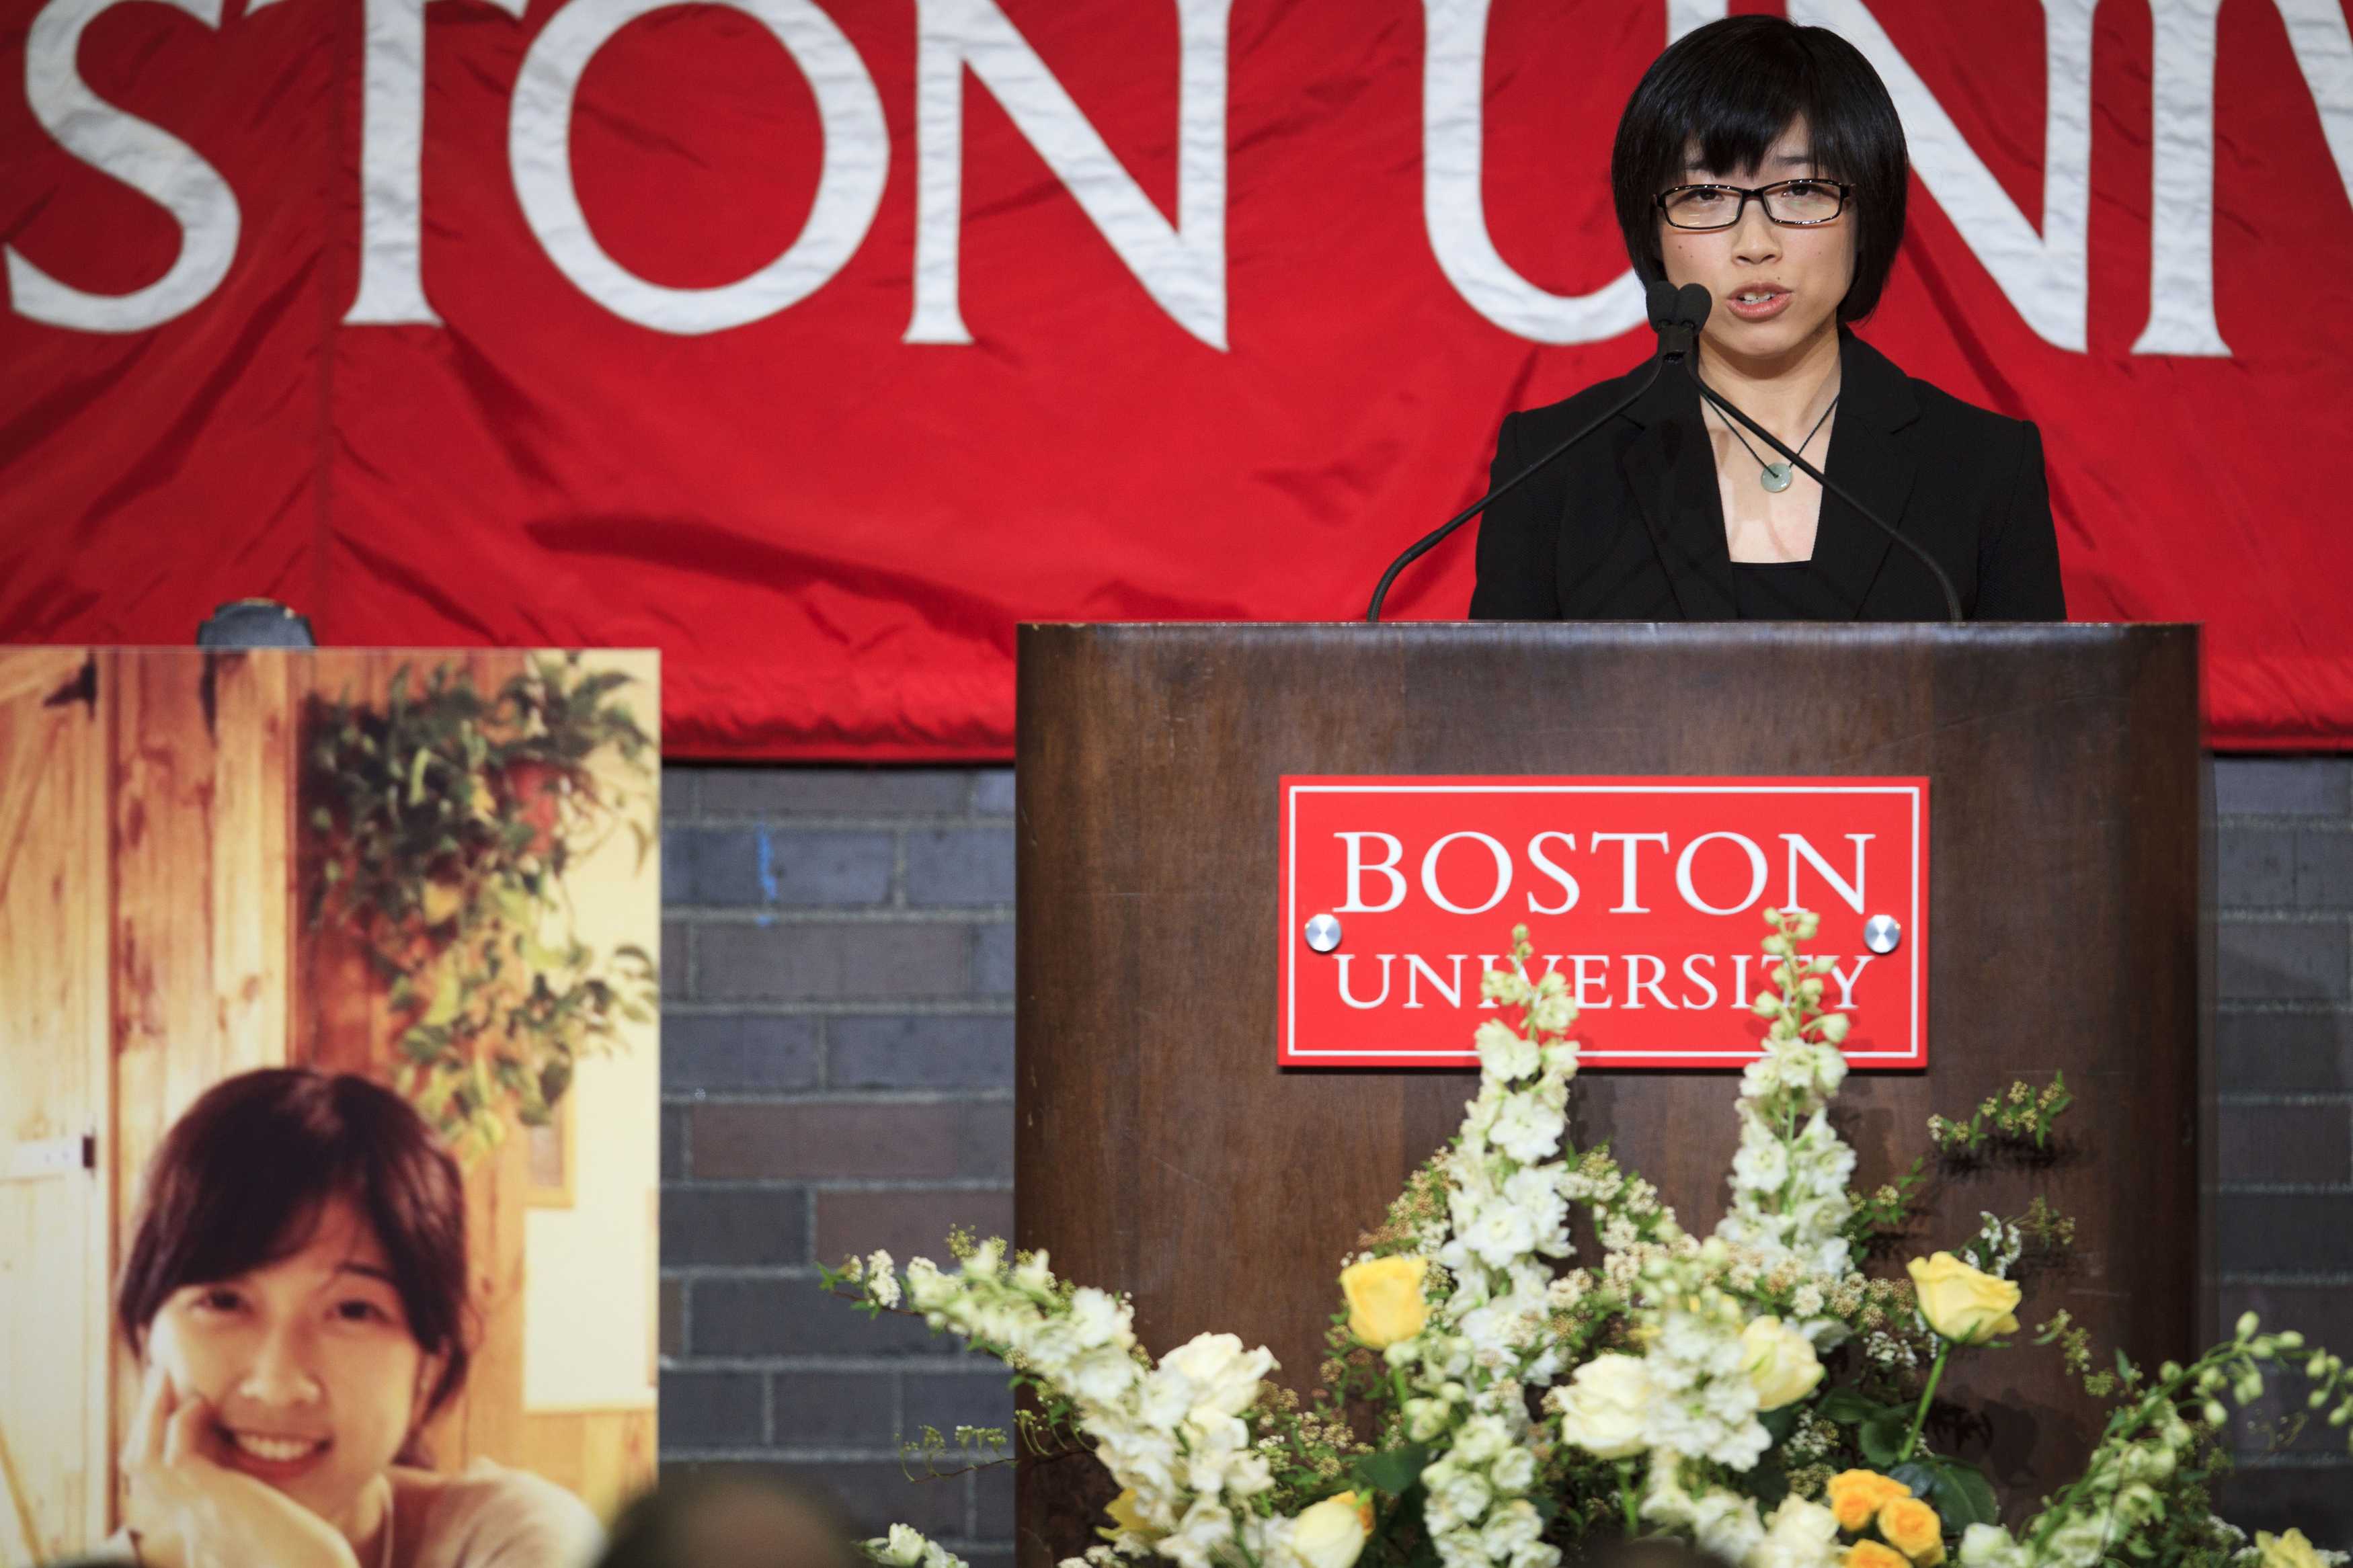 Zheng Minhui, a classmate of Lu Lingzi, gives a remembrance speech during a memorial service for Lingzi at Metcalf Hall in Boston University's George Sherman Student Union. Photo: Reuters